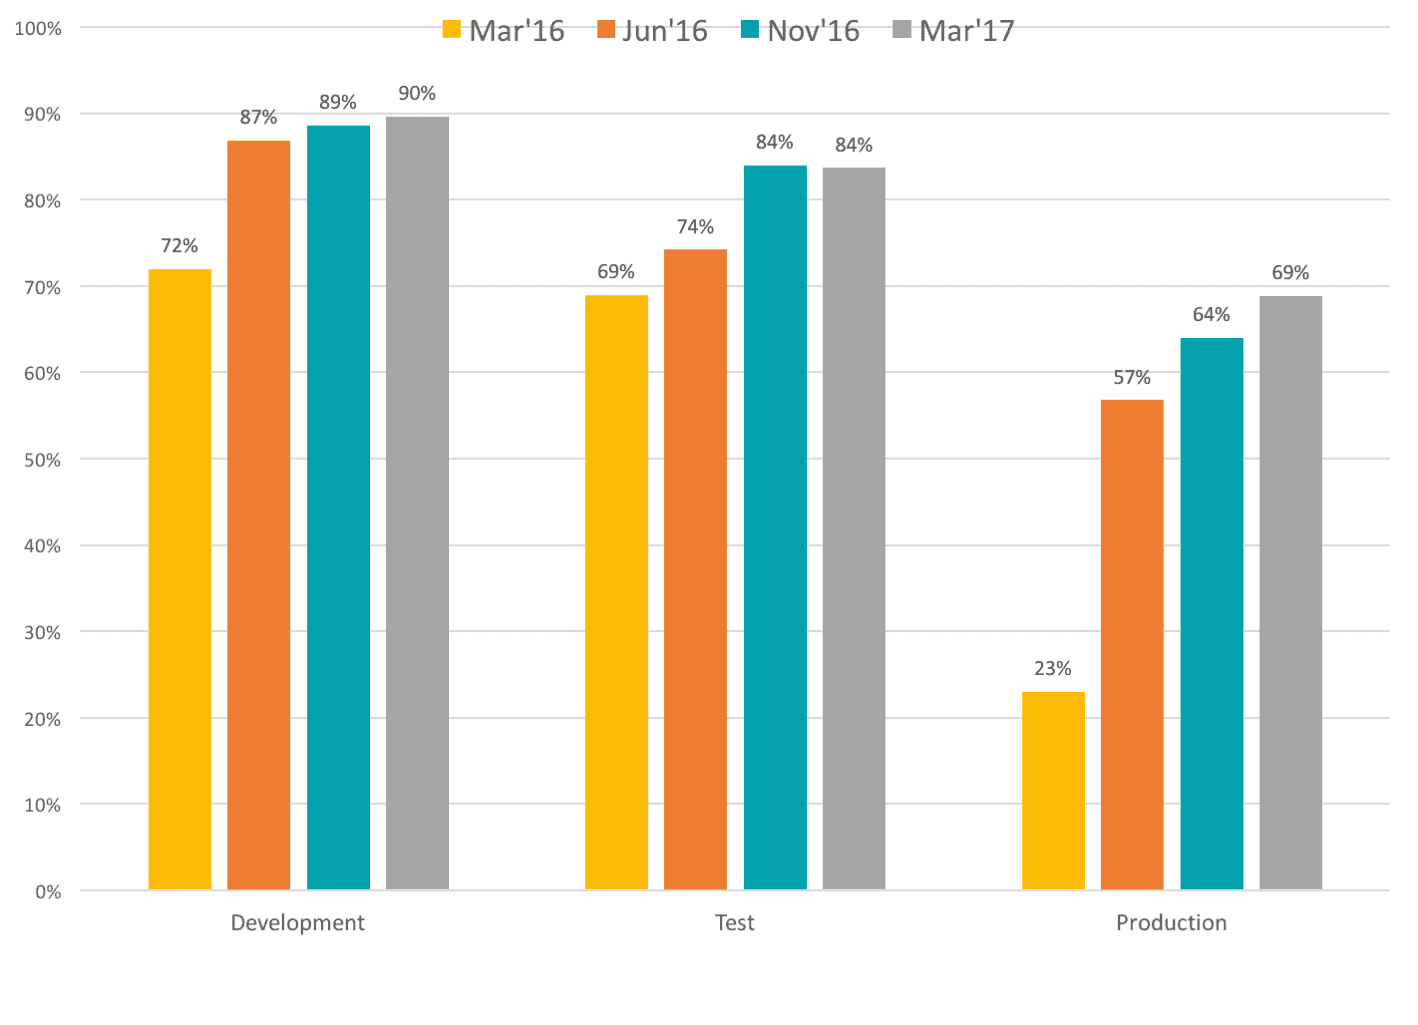 Bar chart shows respondent's choice to expand their container usage into development, test, or production in March 2016, June 2016, November 2016, and March 2017